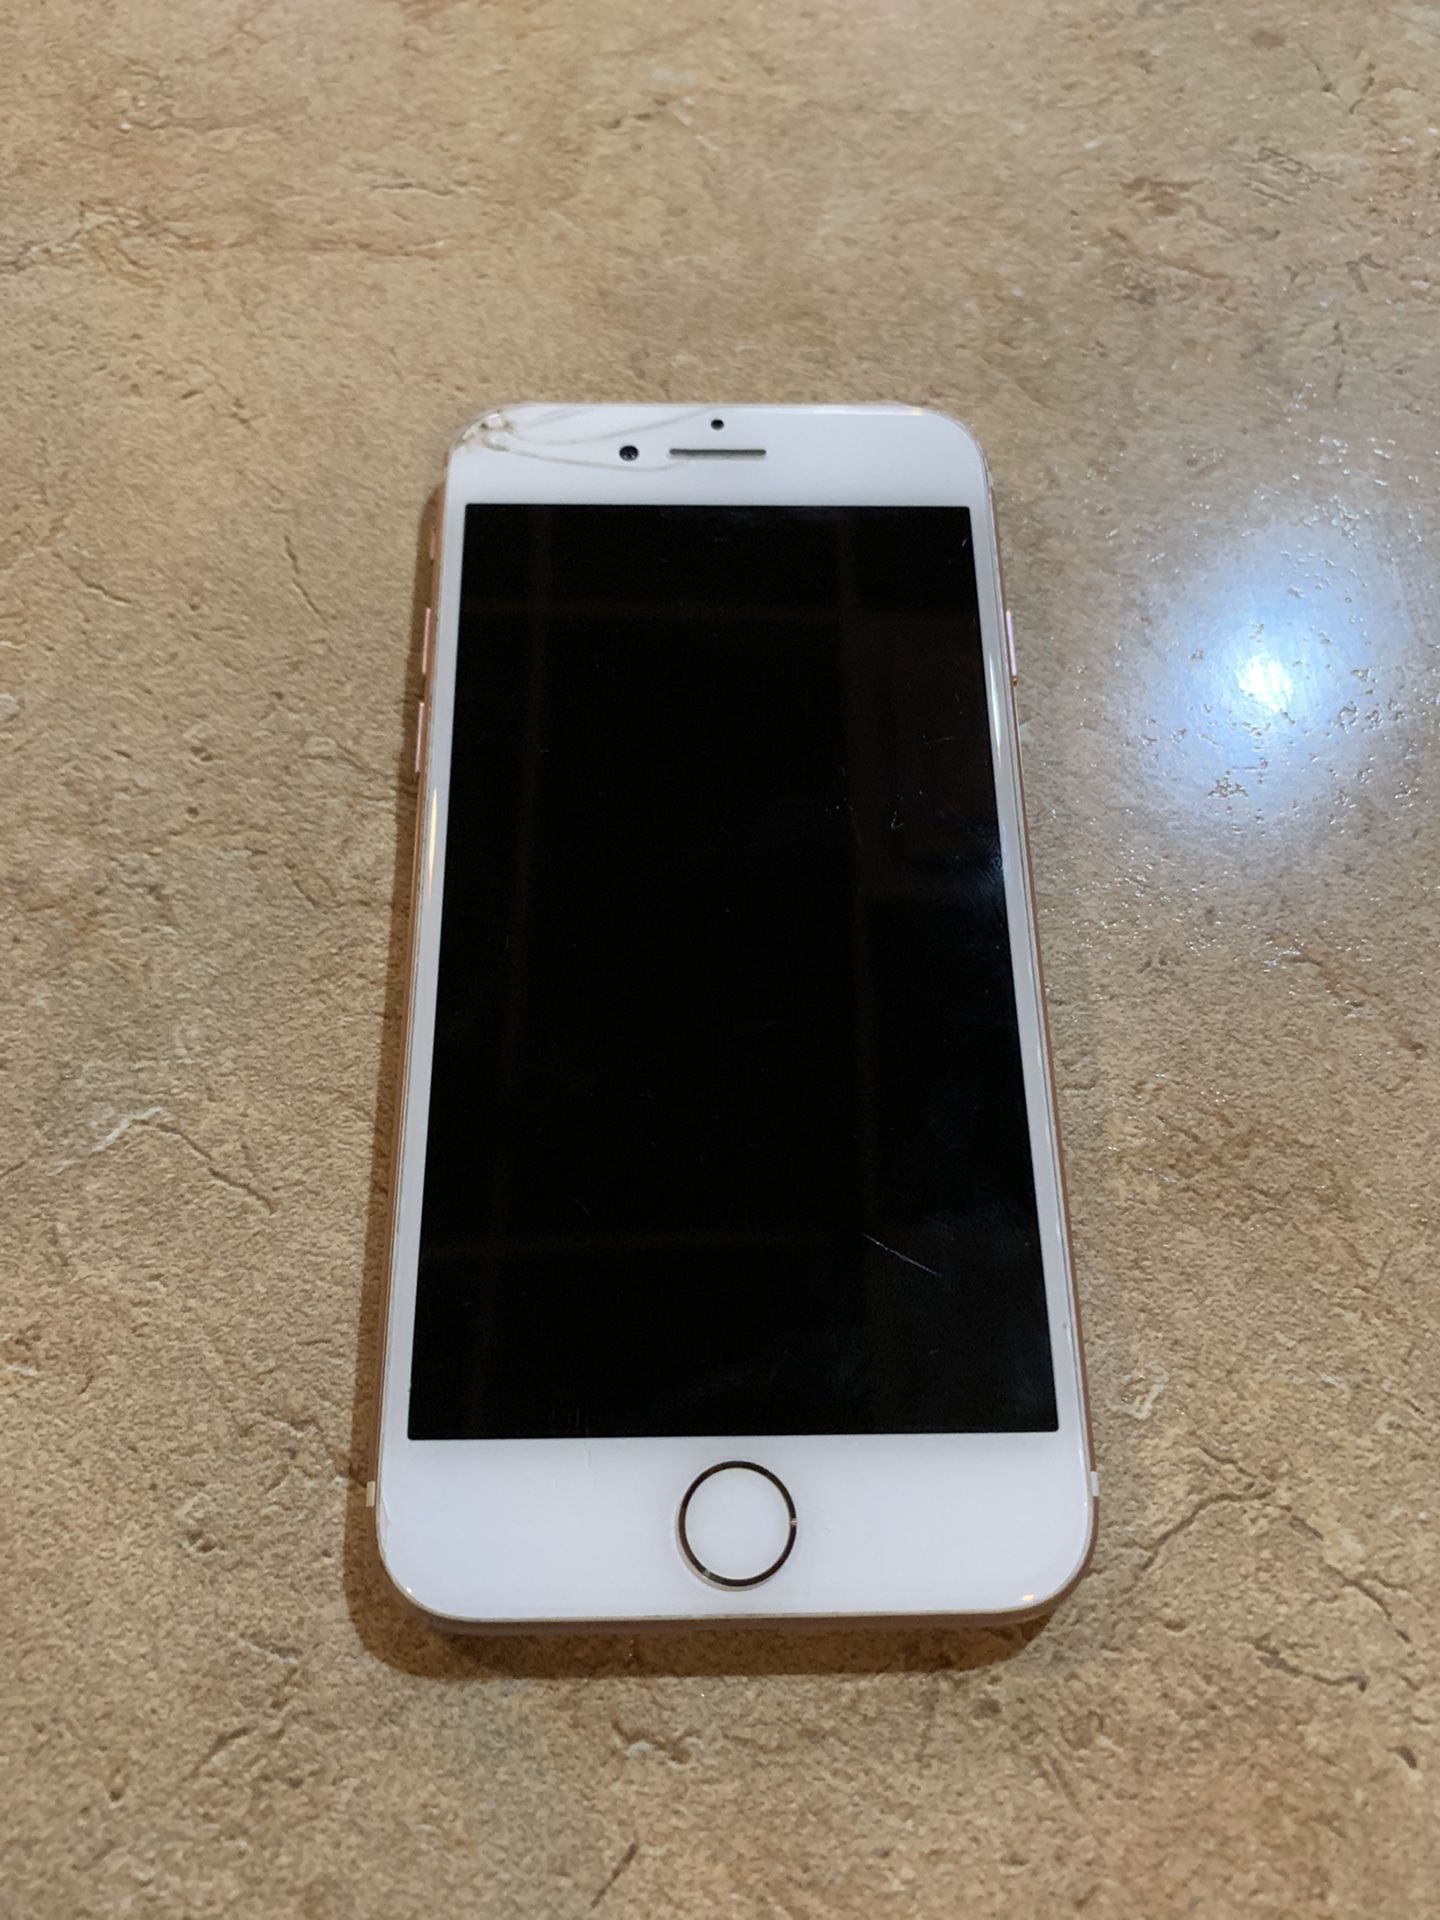 Rose Gold IPhone 7 (32GB) Price is FIRM!